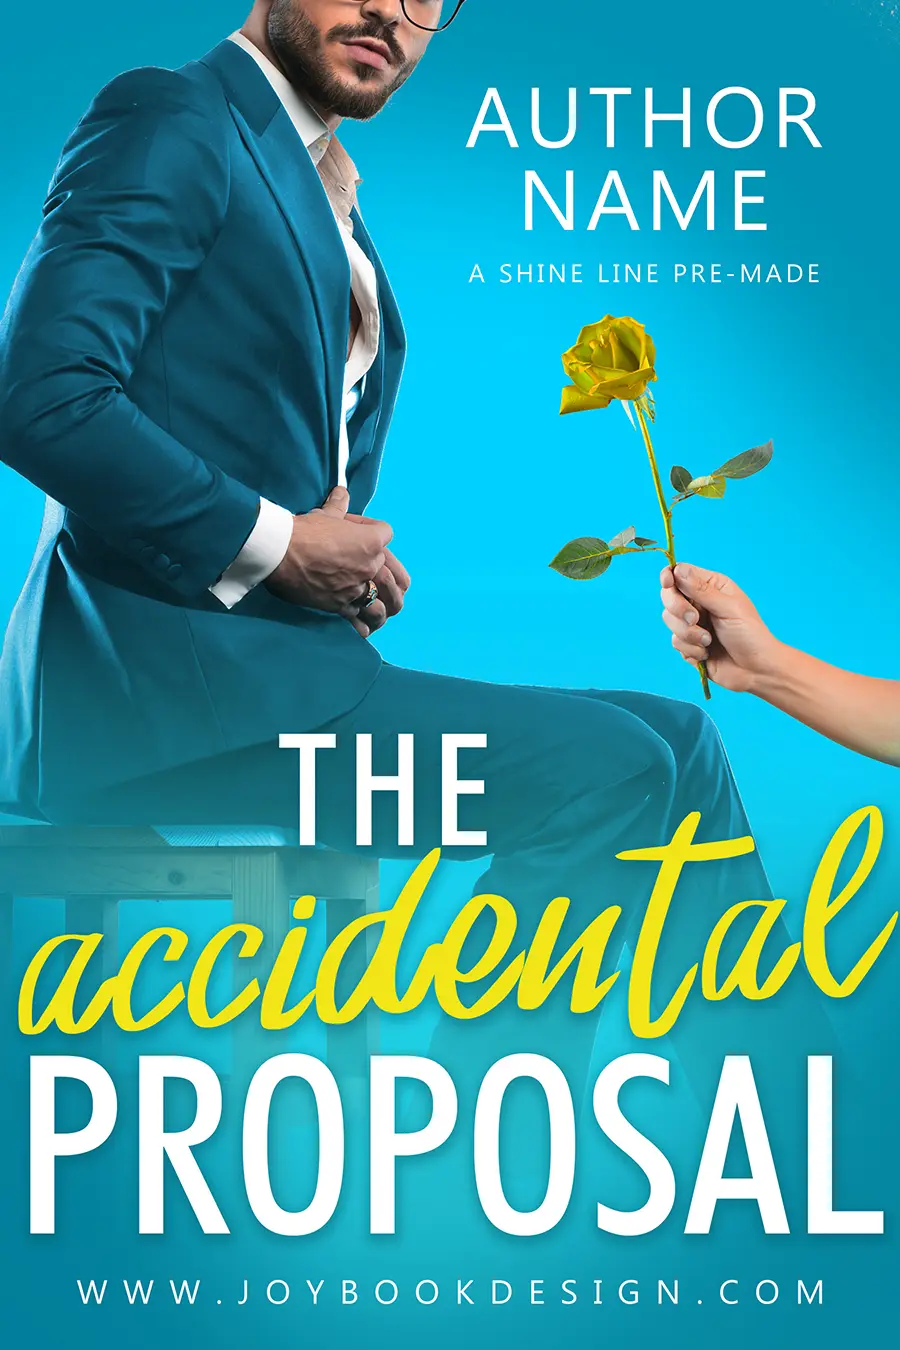 The Accidental Proposal